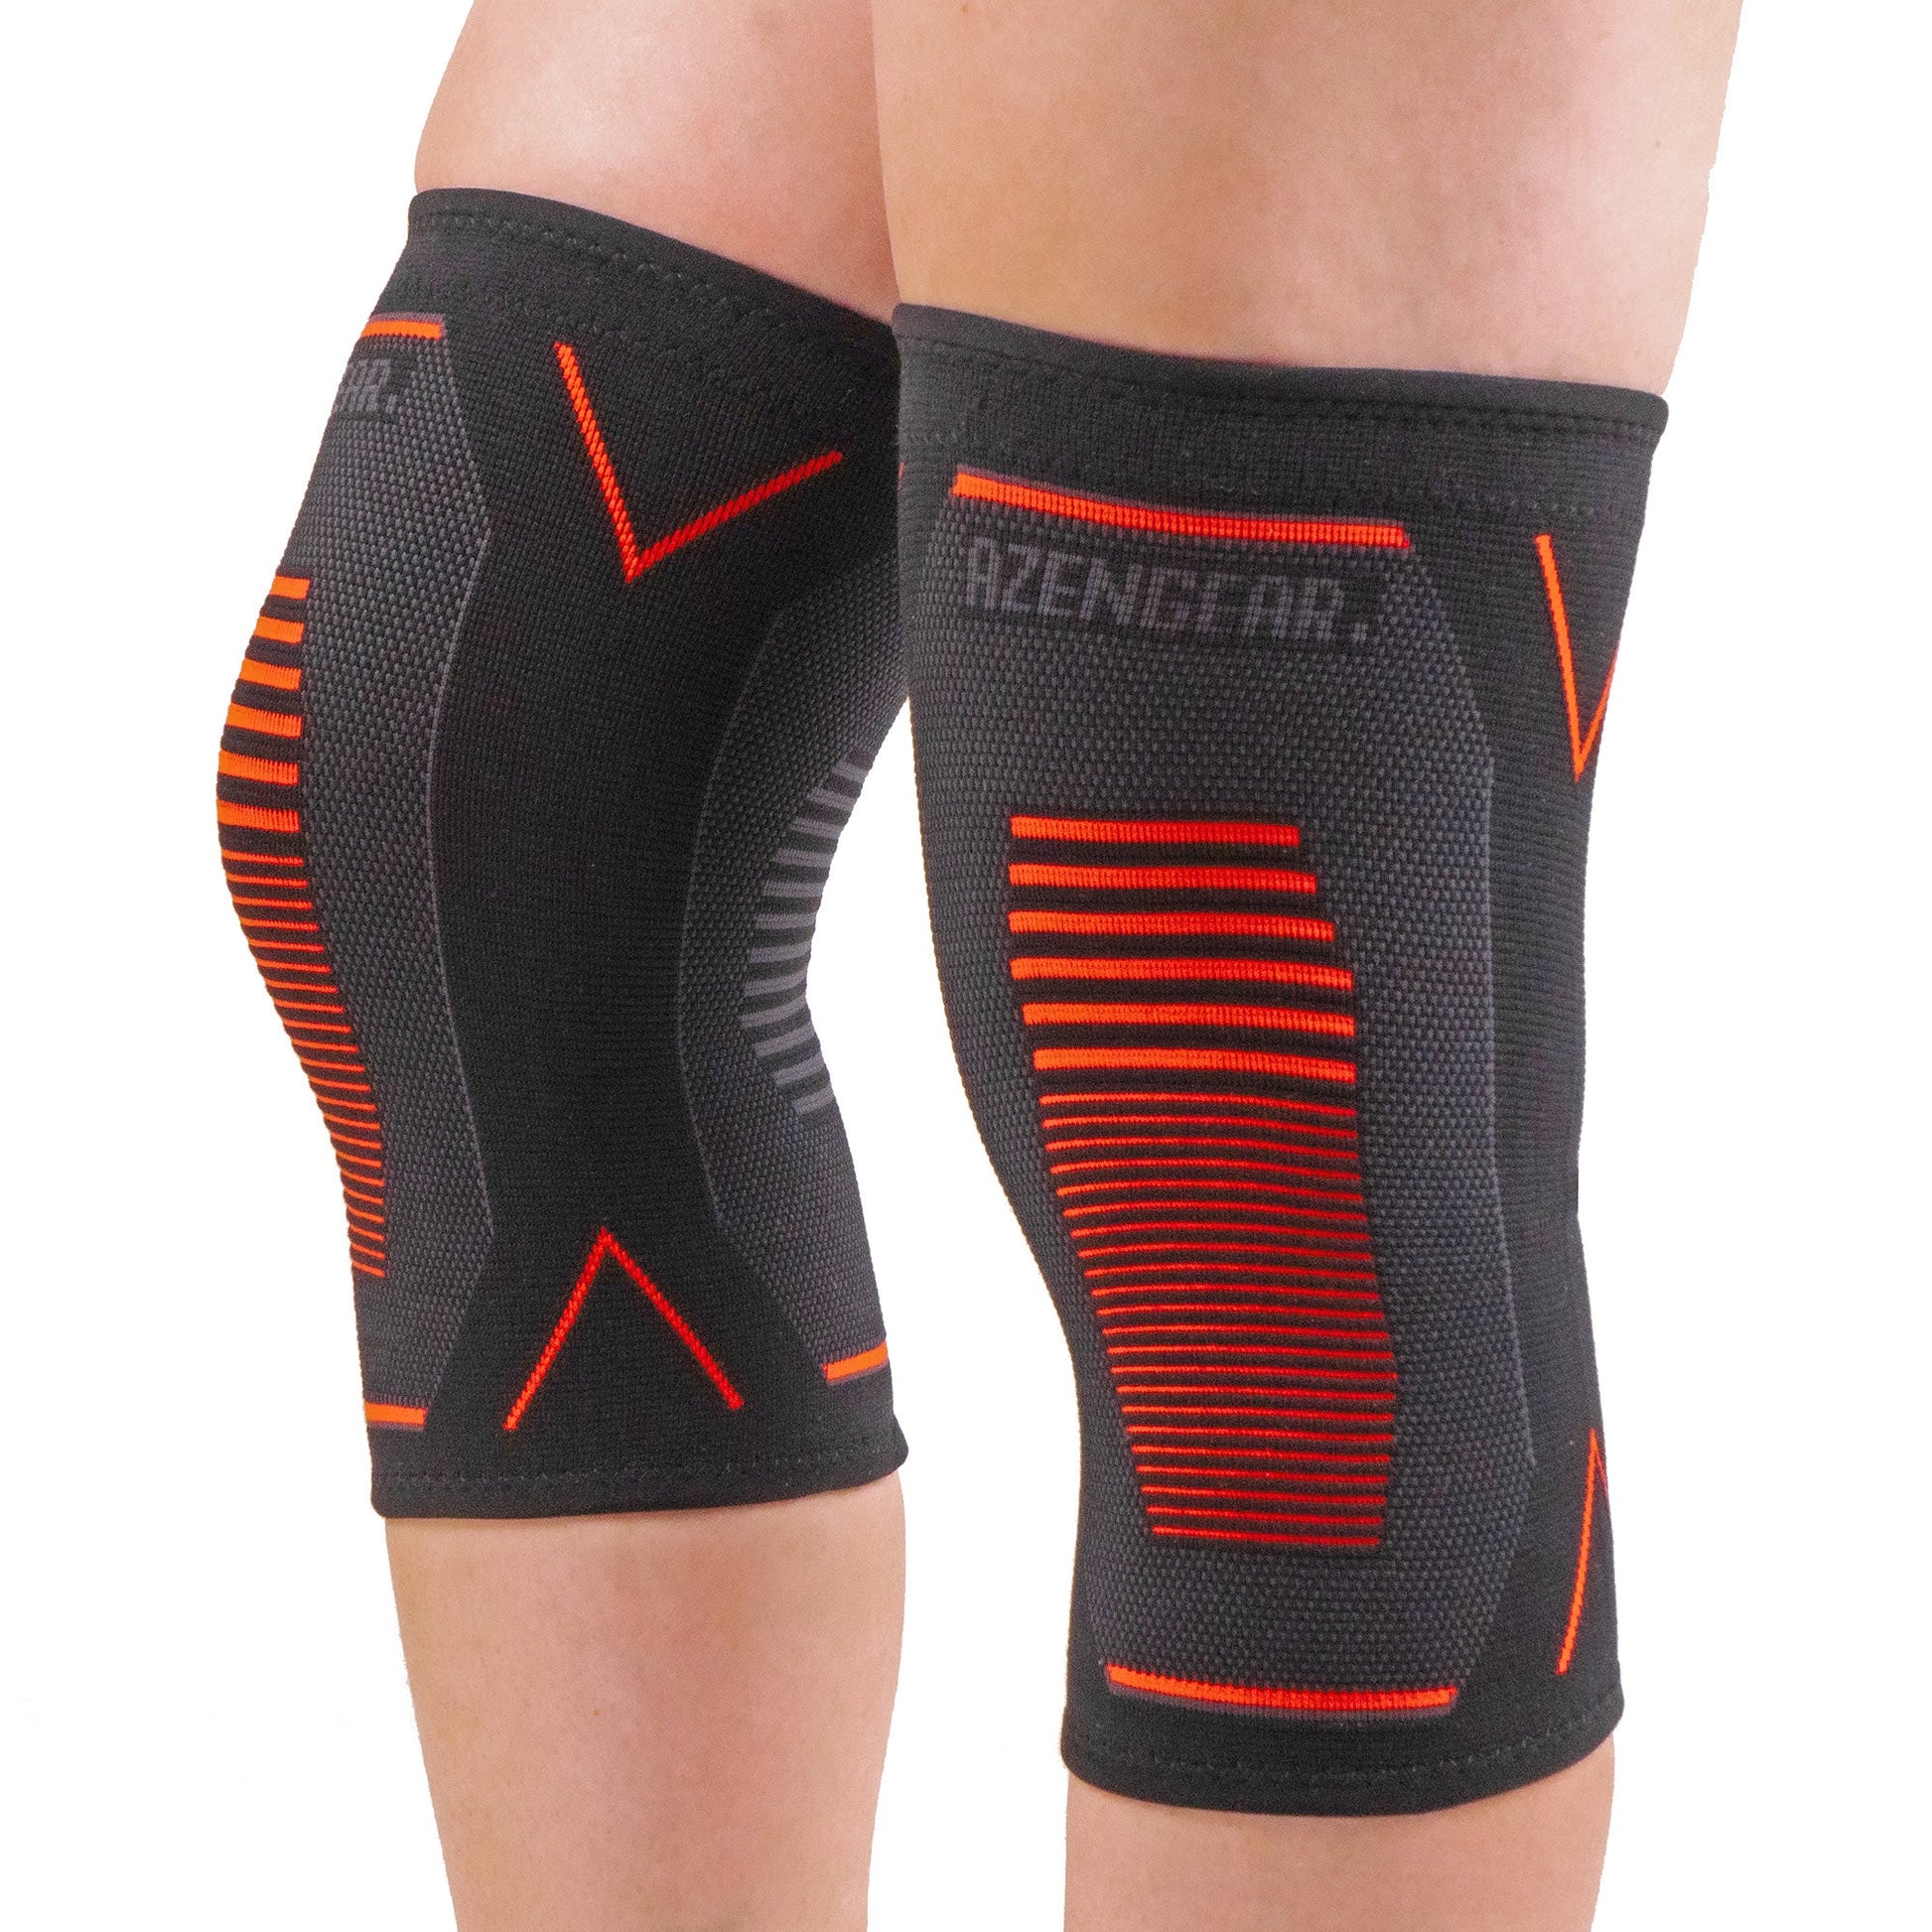  aZengear Calf Support Compression Sleeves (Pair) for